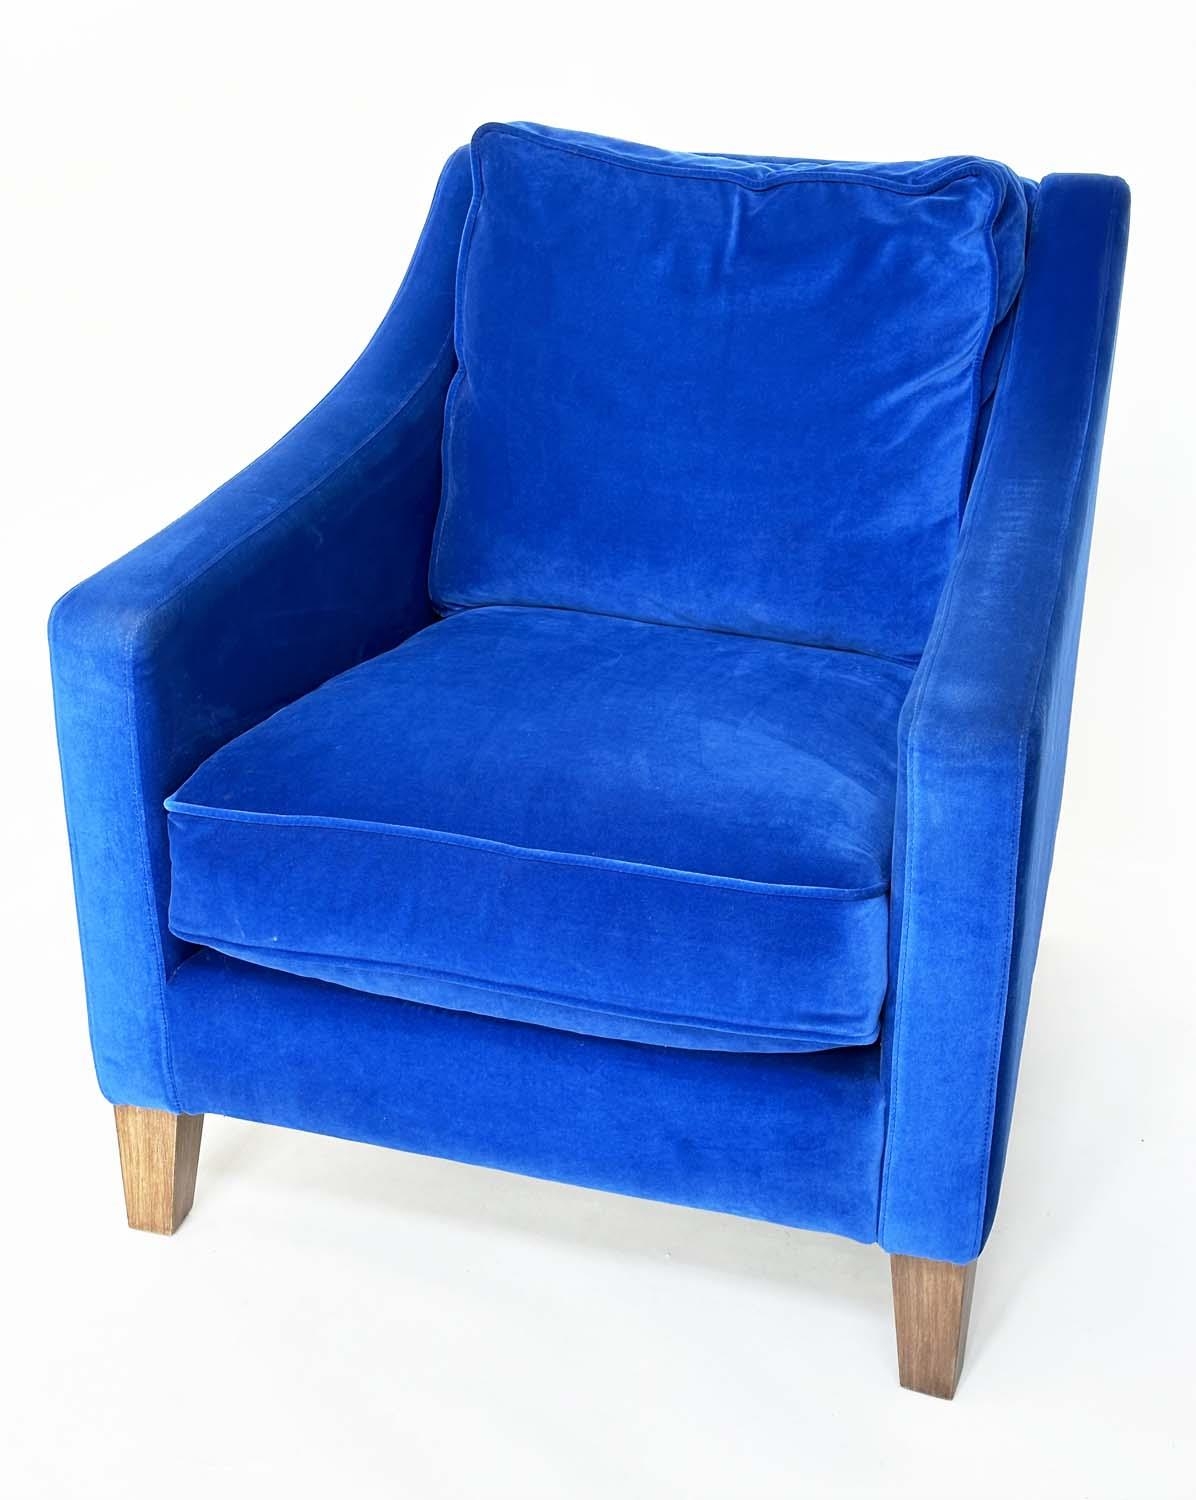 ARMCHAIR, traditional, blue velvet upholstered with soft cushions and tapering supports, Sofa.com, - Image 11 of 11